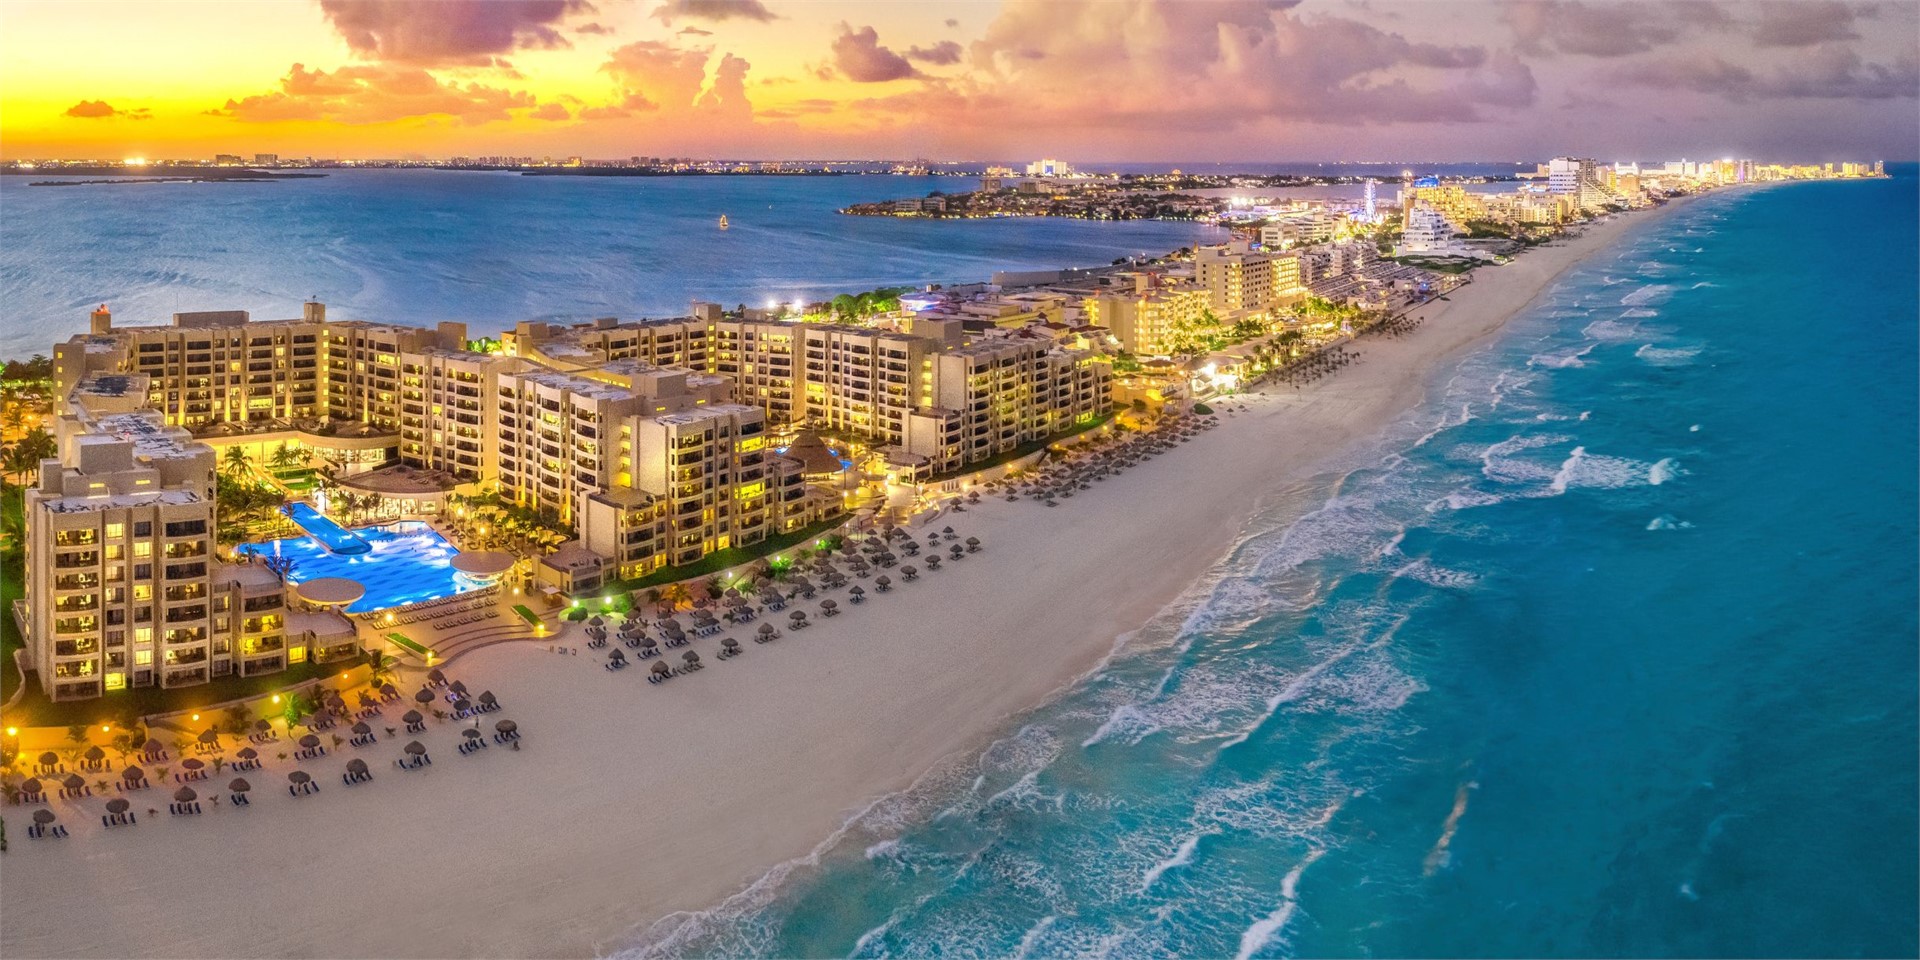 Hotels and accommodation in Cancun, Mexico